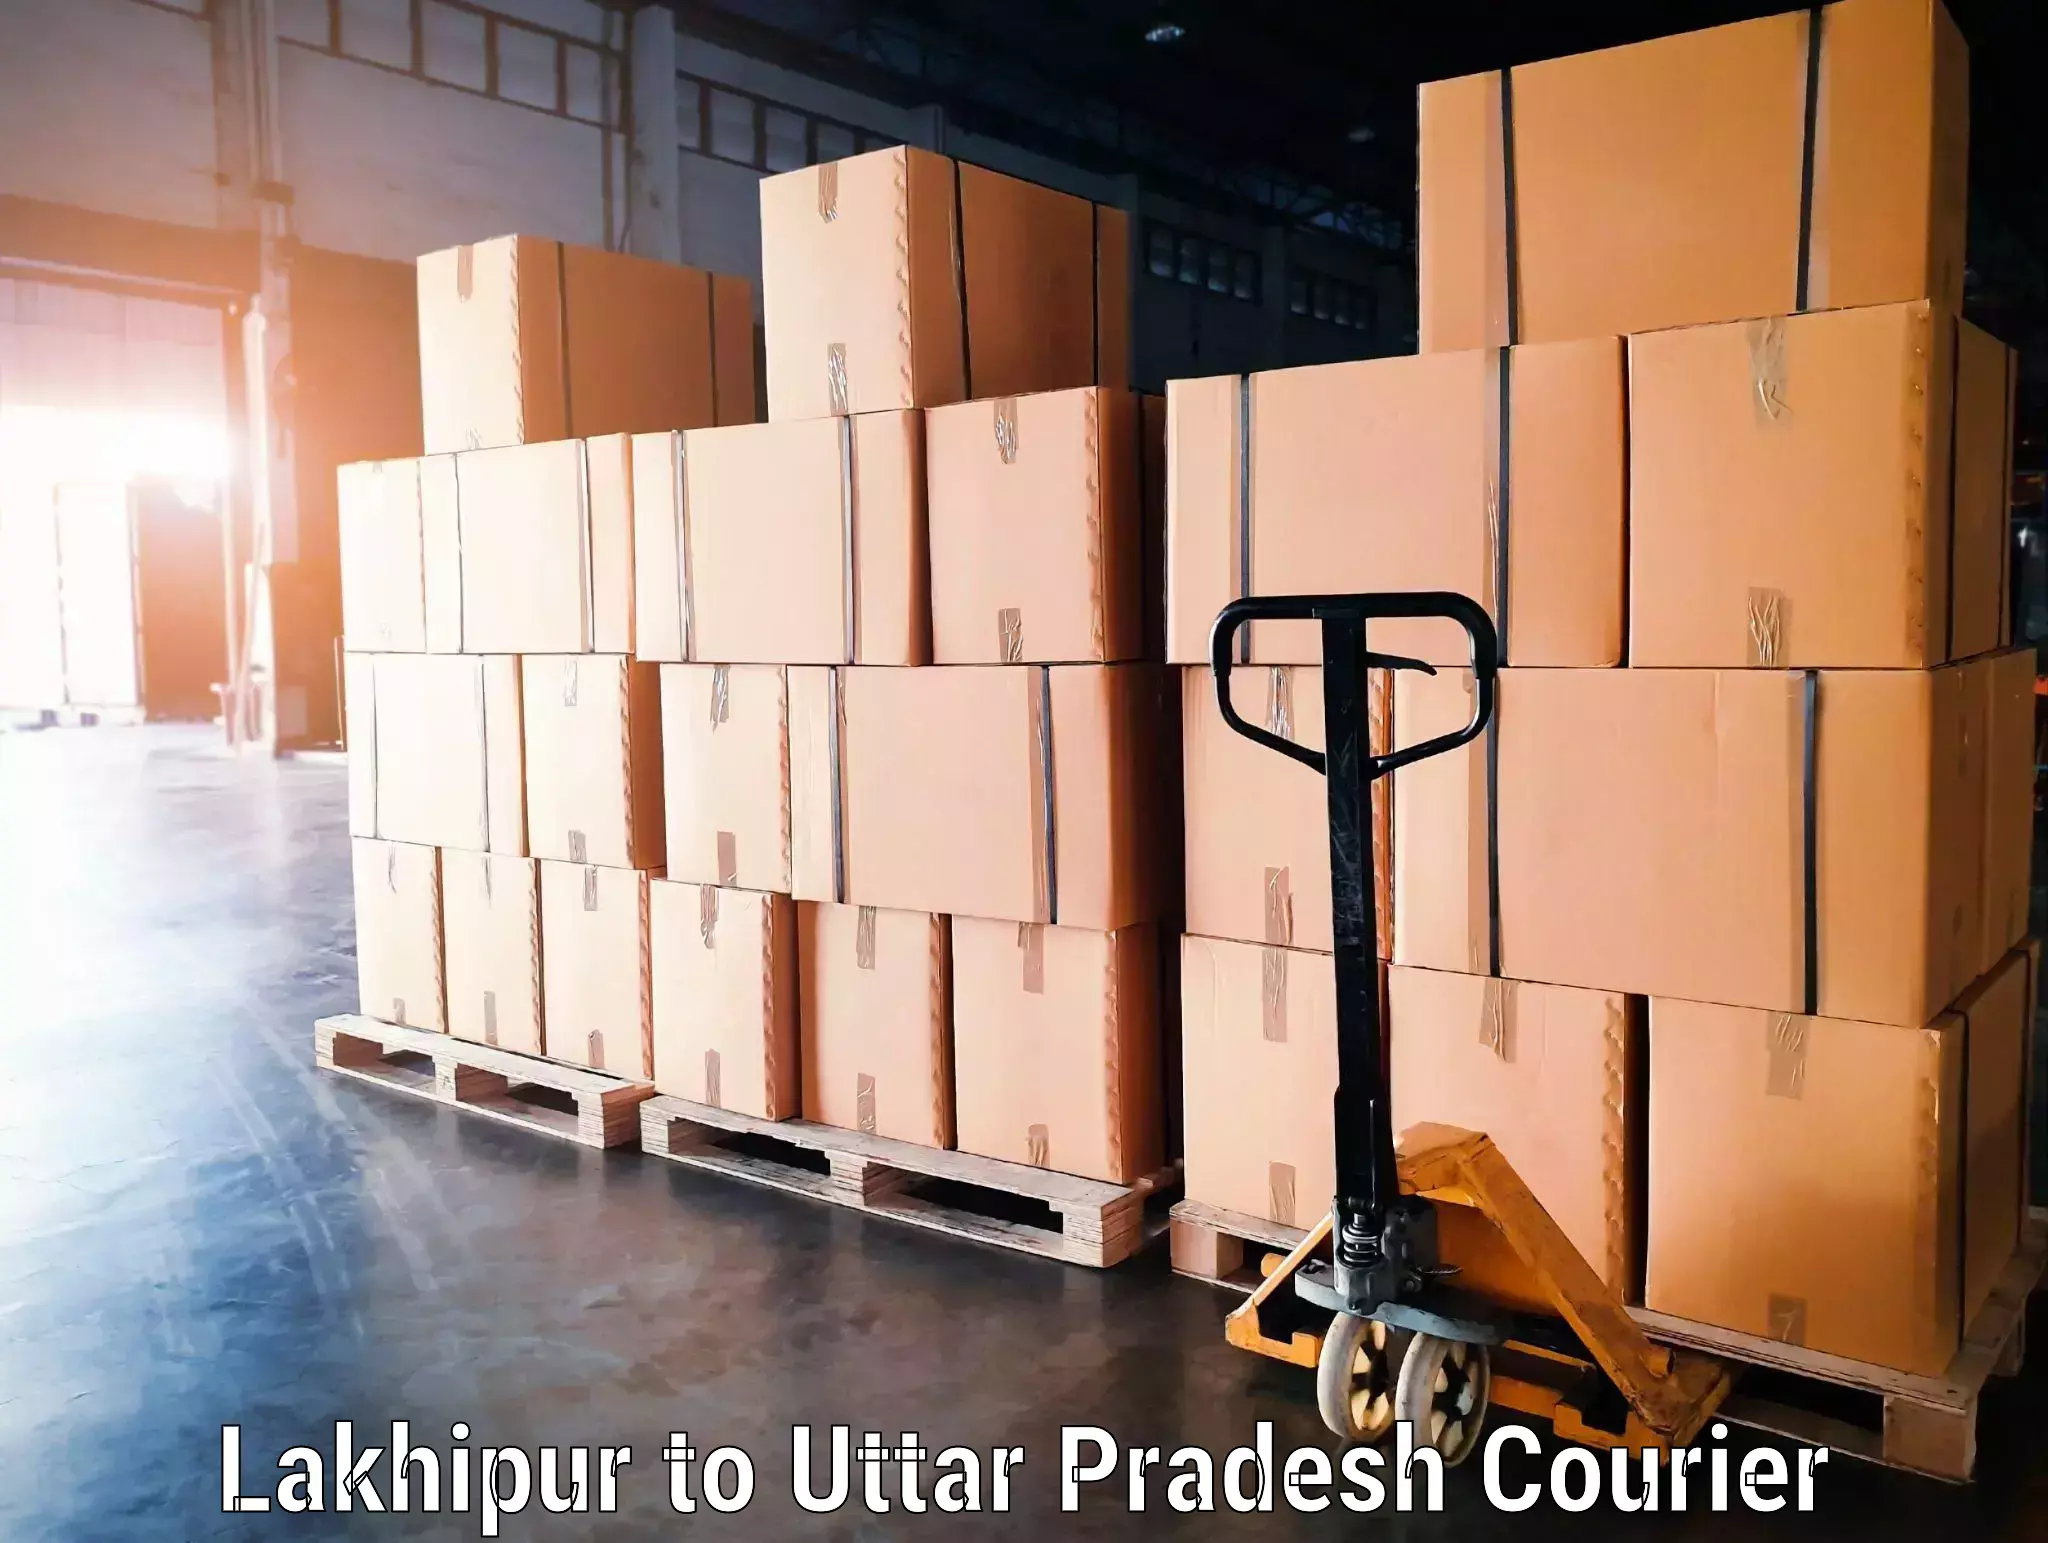 Online luggage shipping booking Lakhipur to Agra